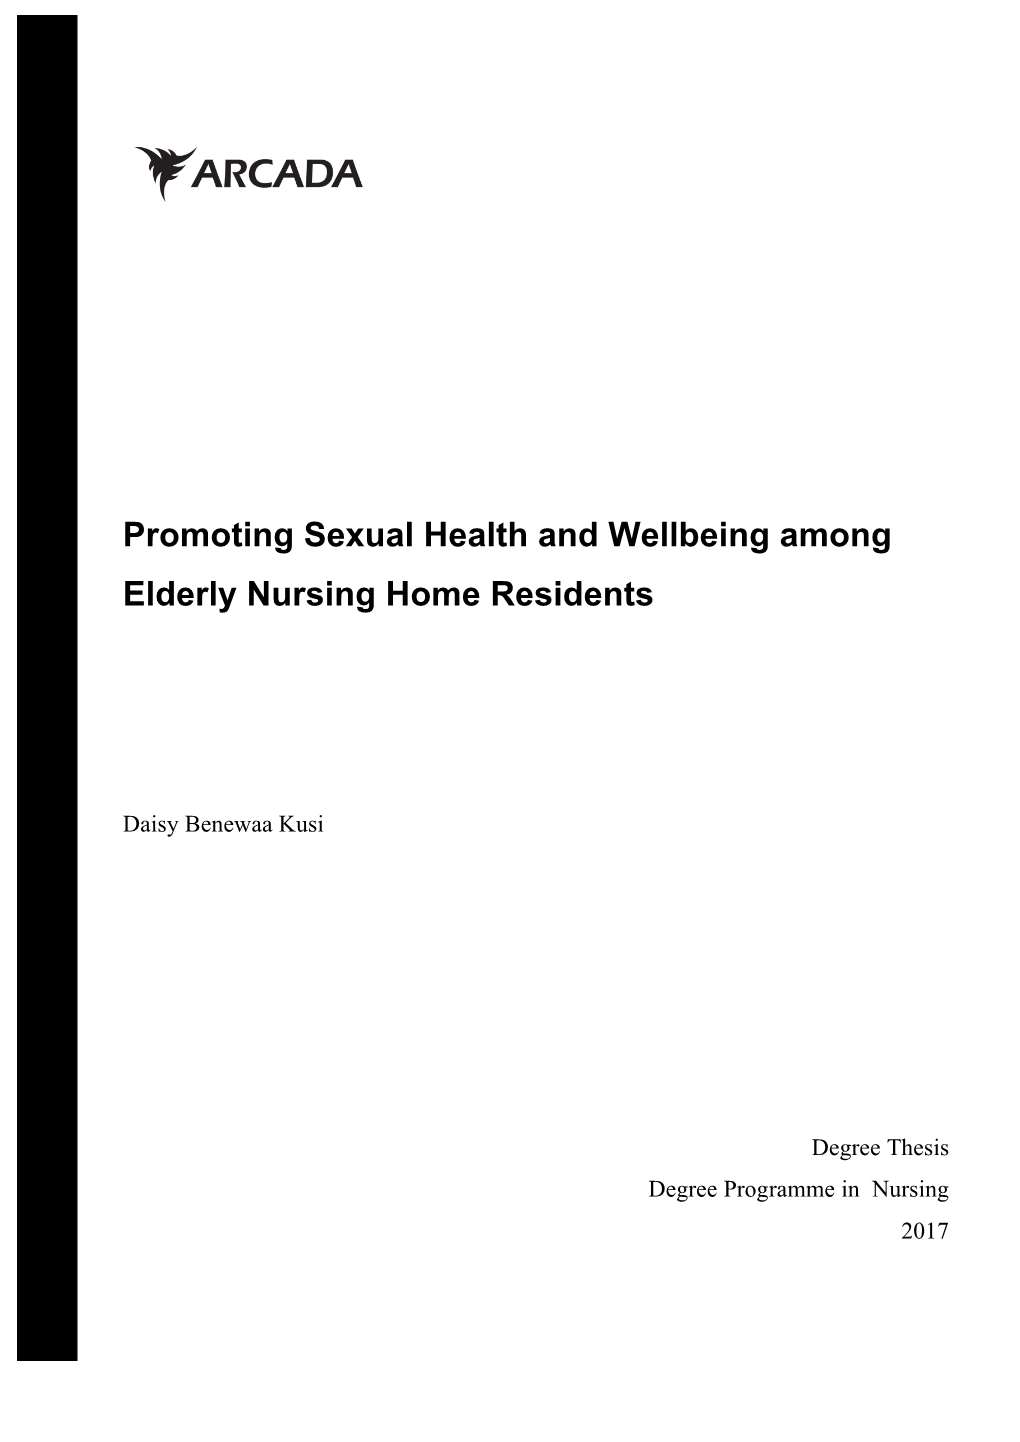 Promoting Sexual Health and Wellbeing Among Elderly Nursing Home Residents